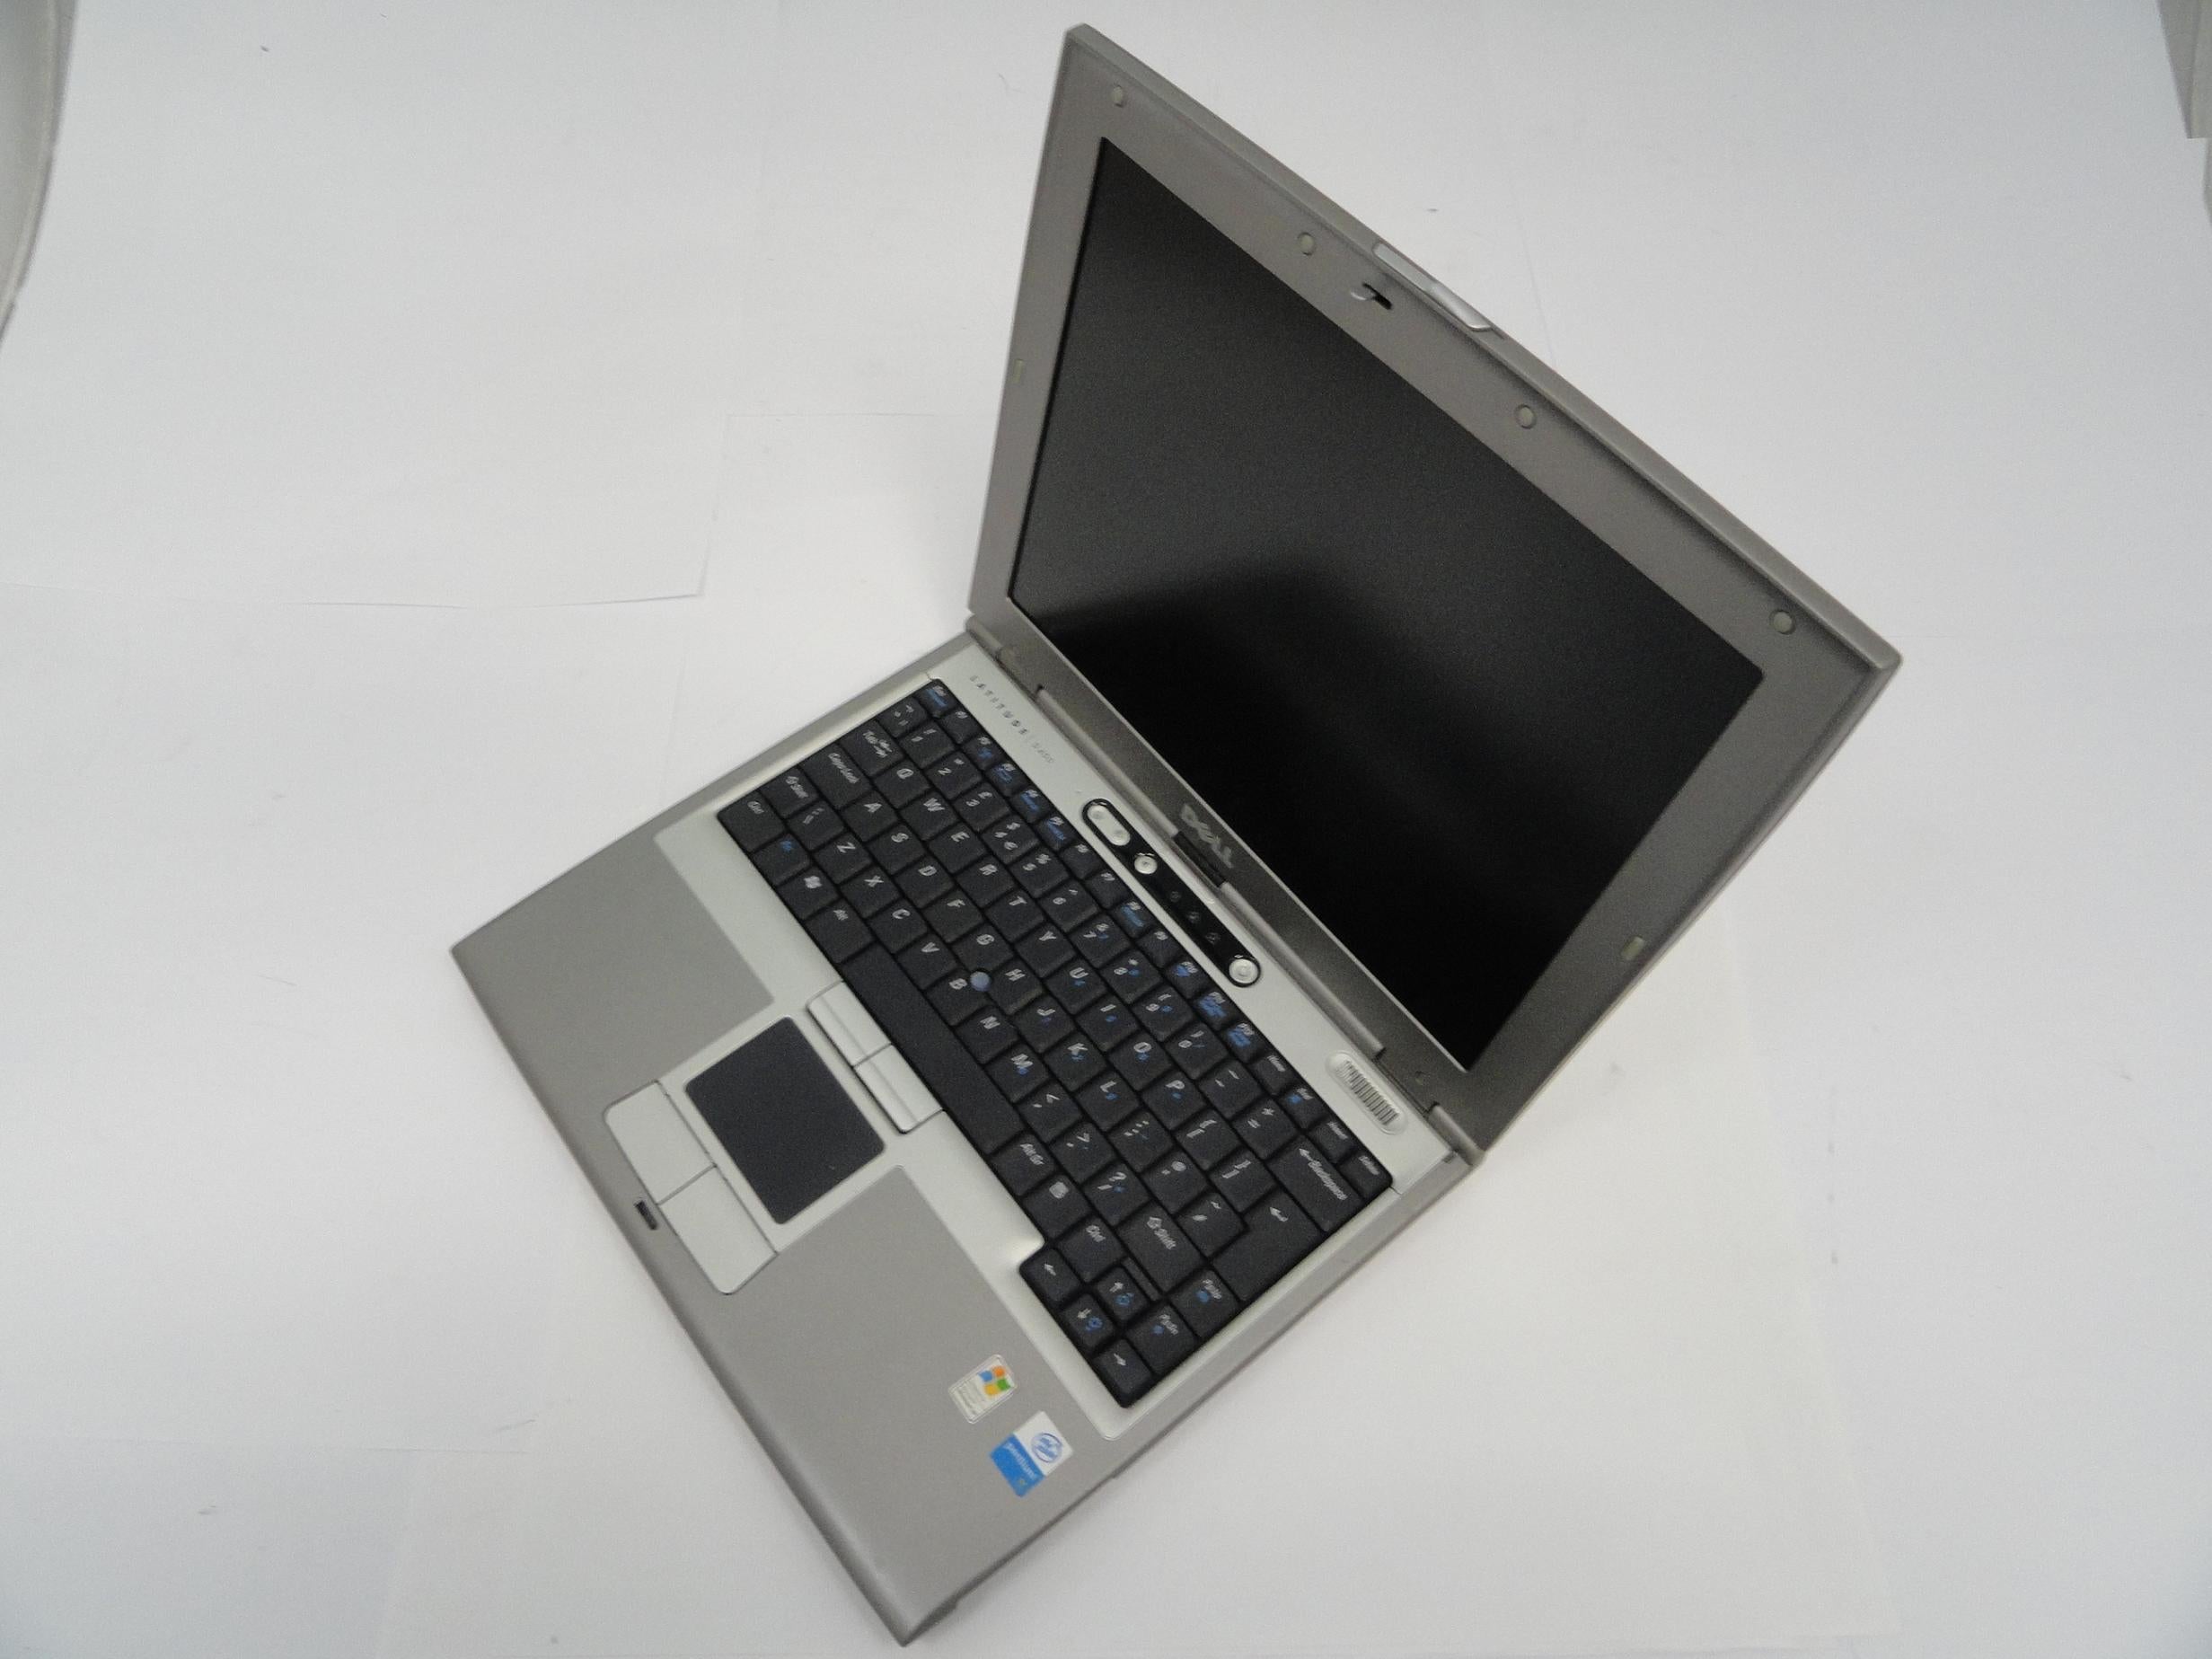 PPT - Dell Latitude D400 1.4GHz Pentium M CPU 512Mb On-Board RAM No HDD. No Optical Drives - USED